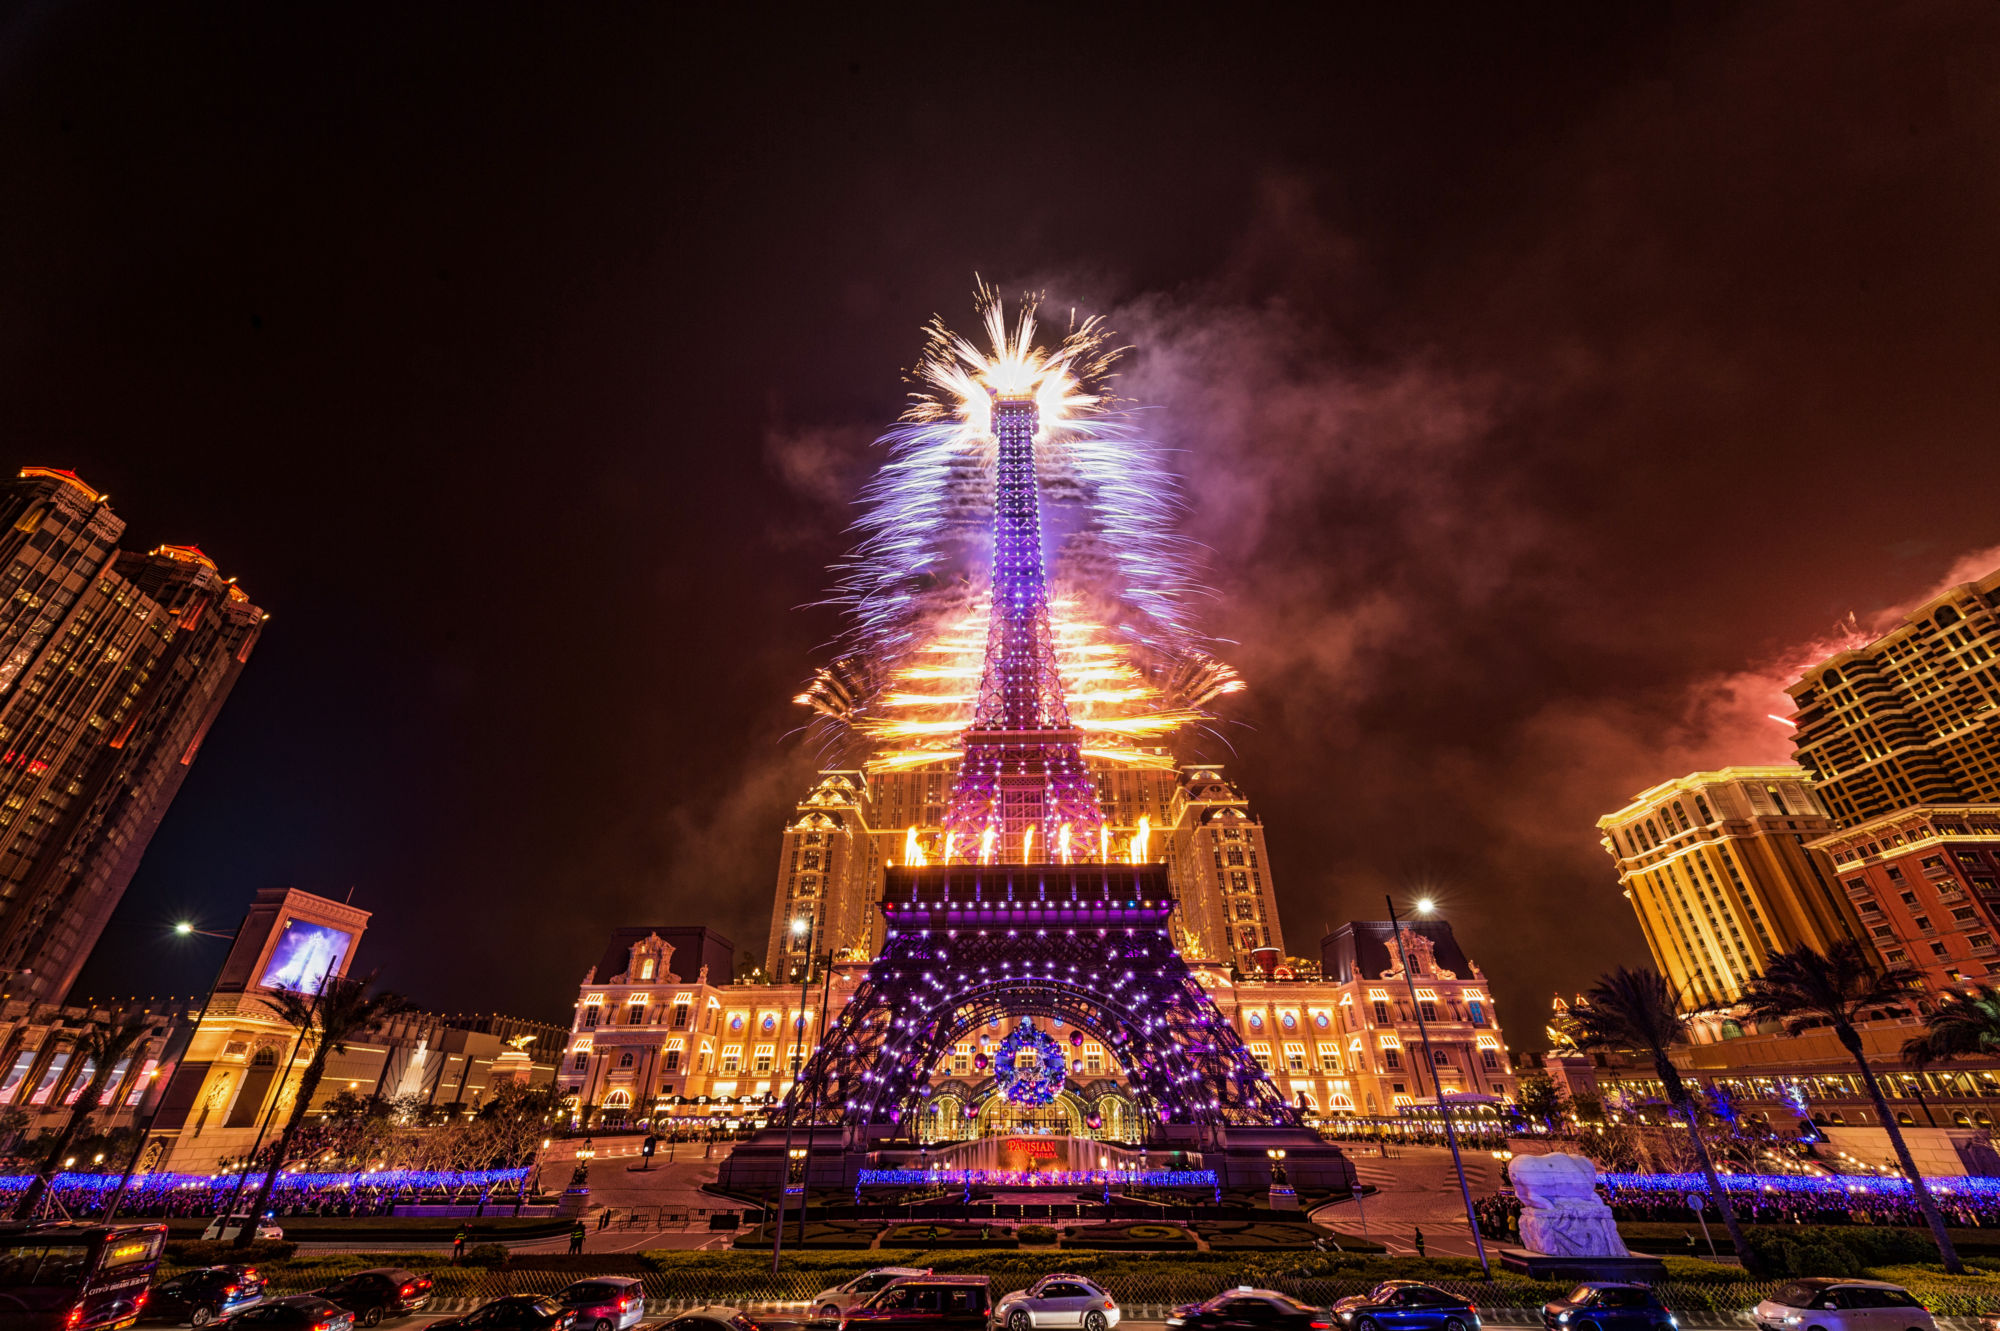 Countdown at The Parisian Macao 2020 Photo Sands Resorts Fireworks Behind the Tower